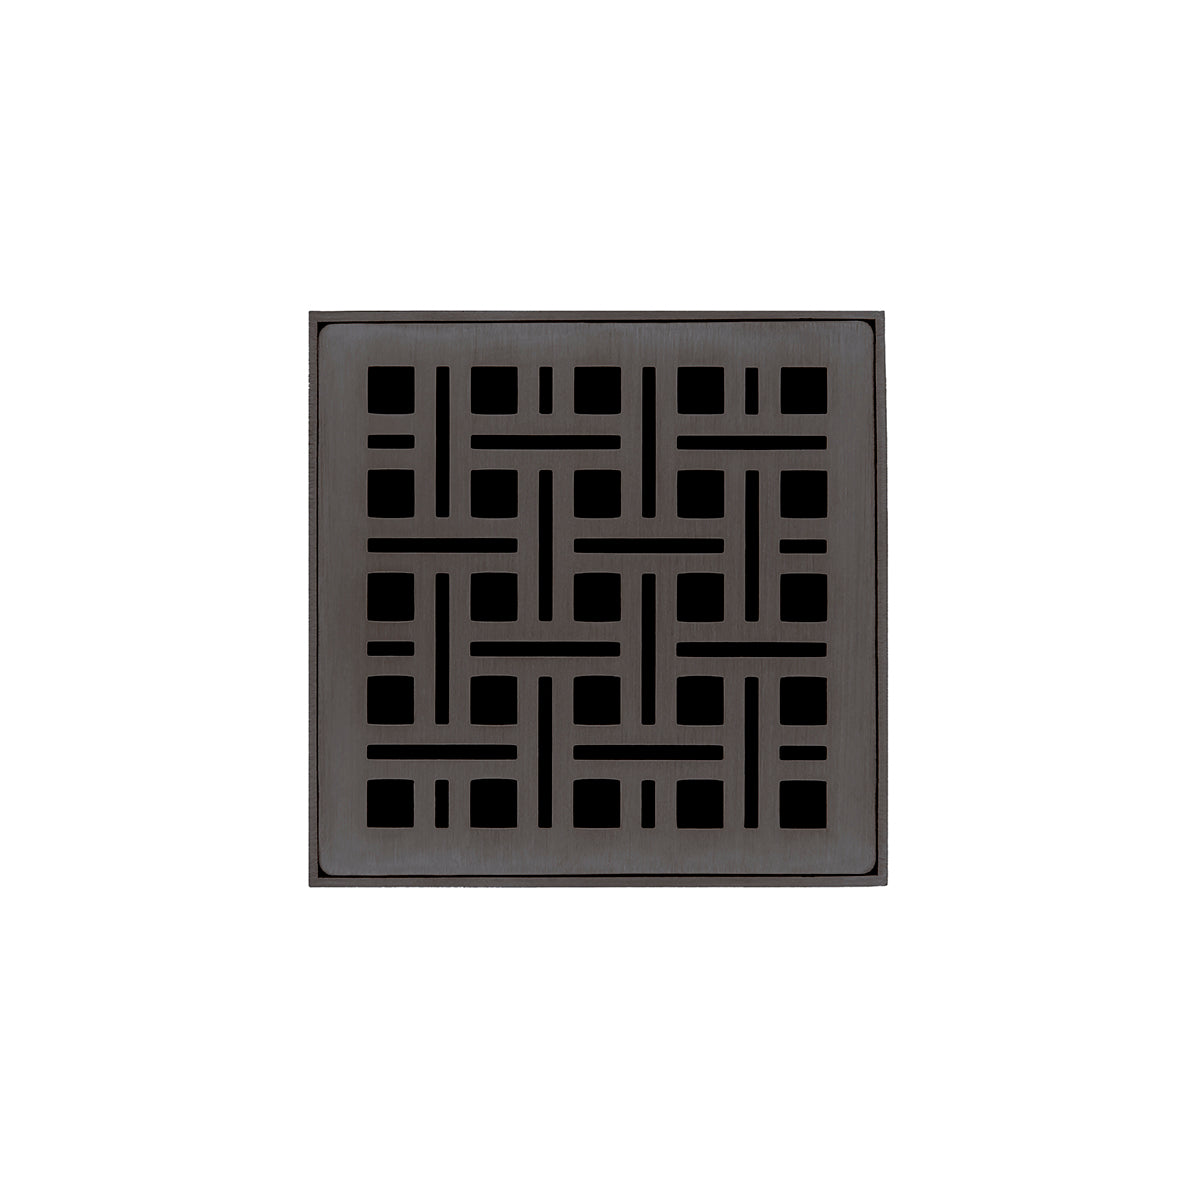 Infinity Drain 4" x 4" VD 4 Premium Center Drain Kit with Weave Pattern Decorative Plate with ABS Drain Body, 2" Outlet